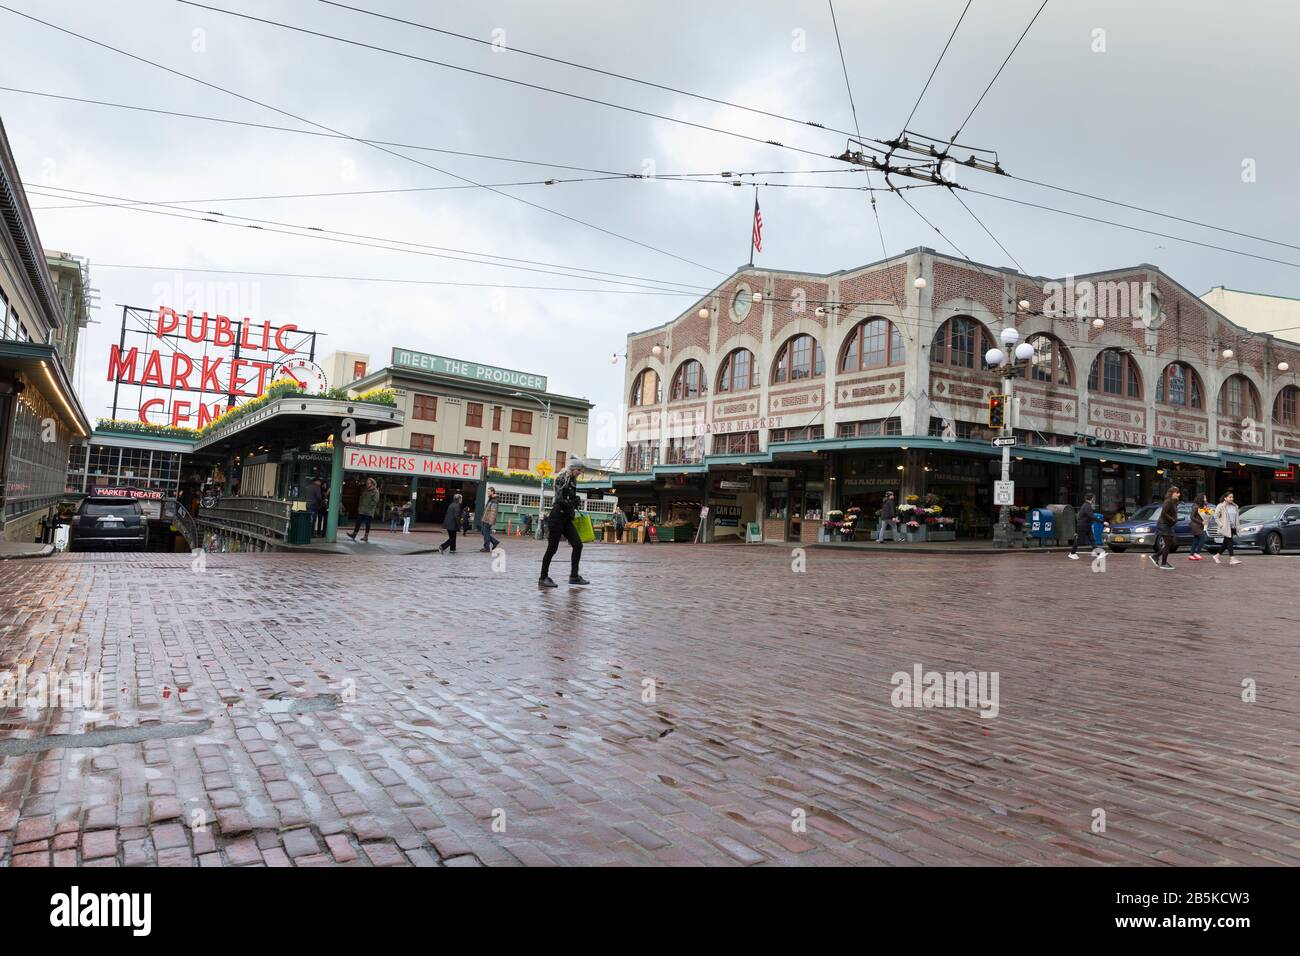 Pike Place Market is quiet on Sunday, March 8. 2020. As the epicenter of the coronavirus outbreak in the U.S., Seattle area business struggle while work and travel restrictions continue to impact the local economy. Stock Photo